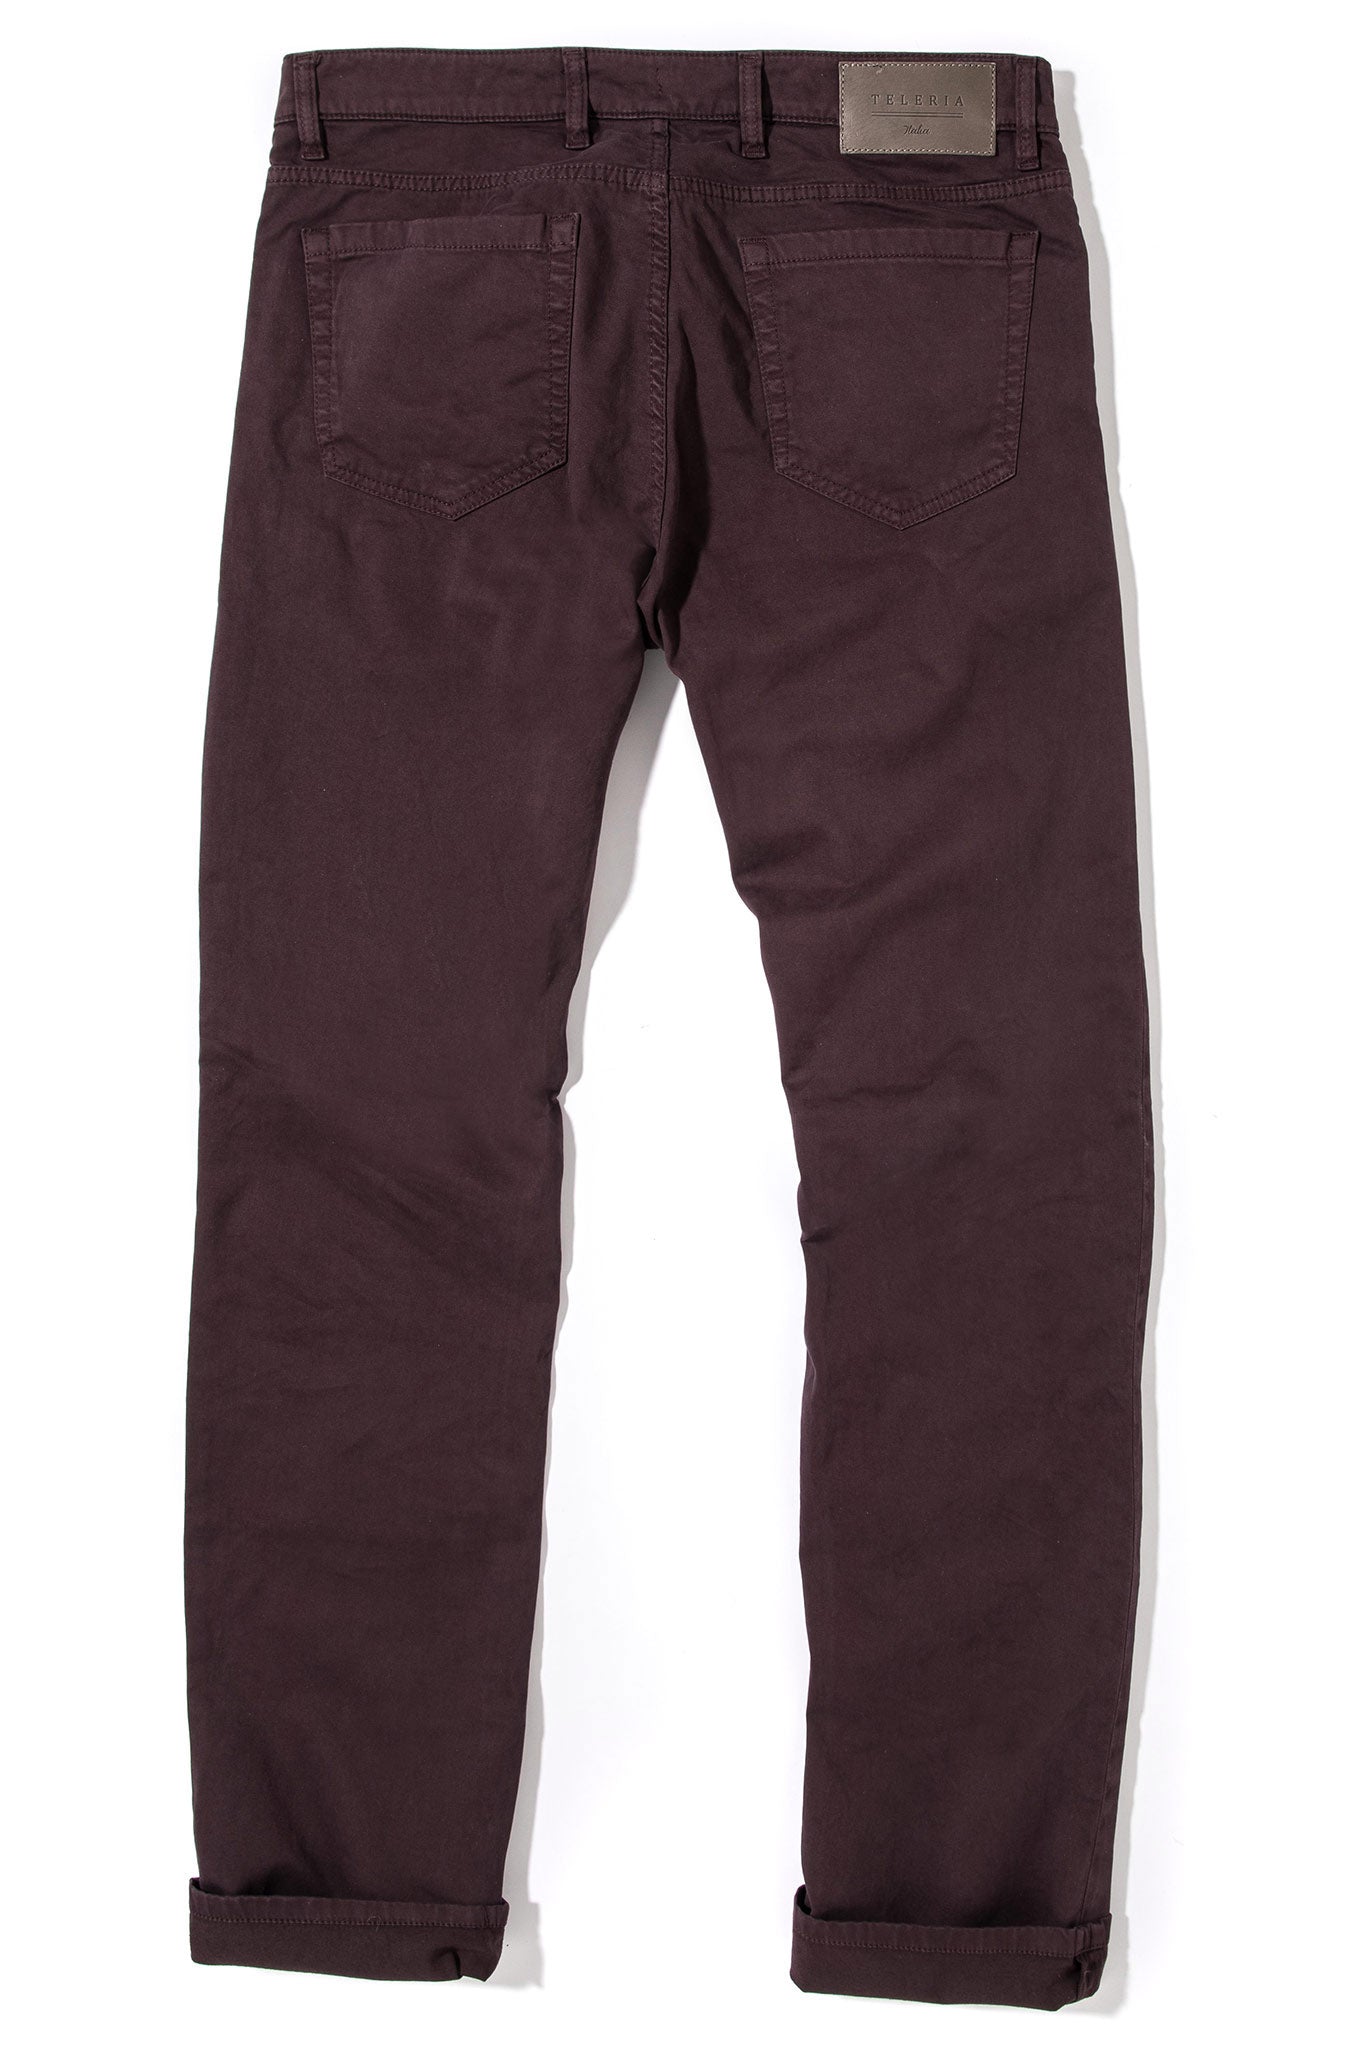 Yuma Soft Touch In Mosto | Mens - Pants - 5 Pocket | Teleria Zed